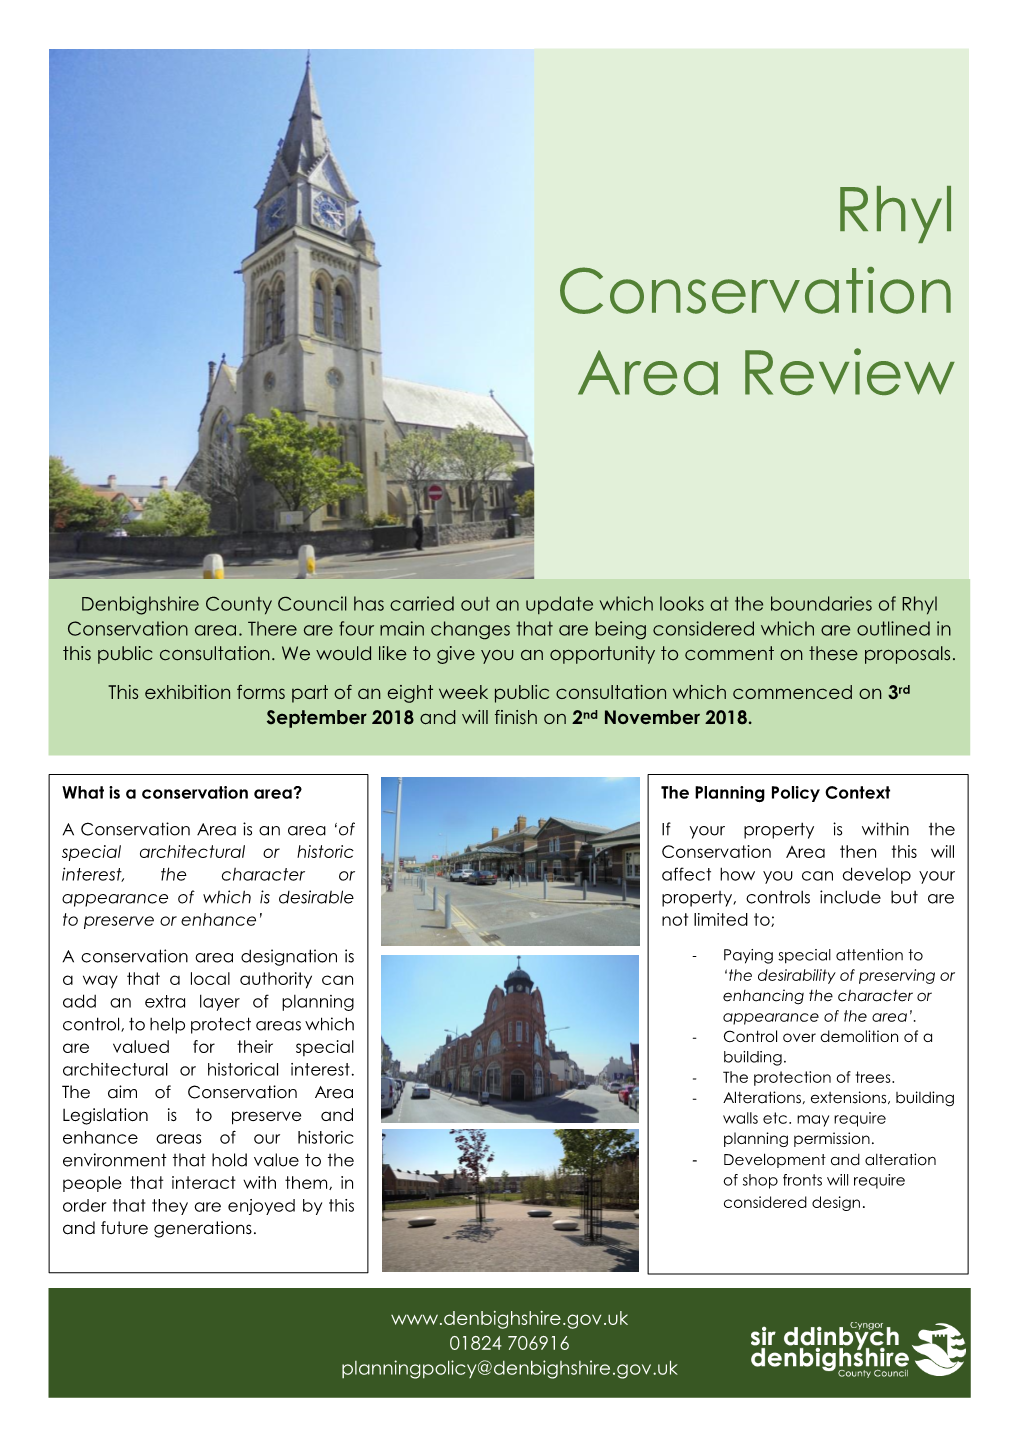 Rhyl Conservation Area Review